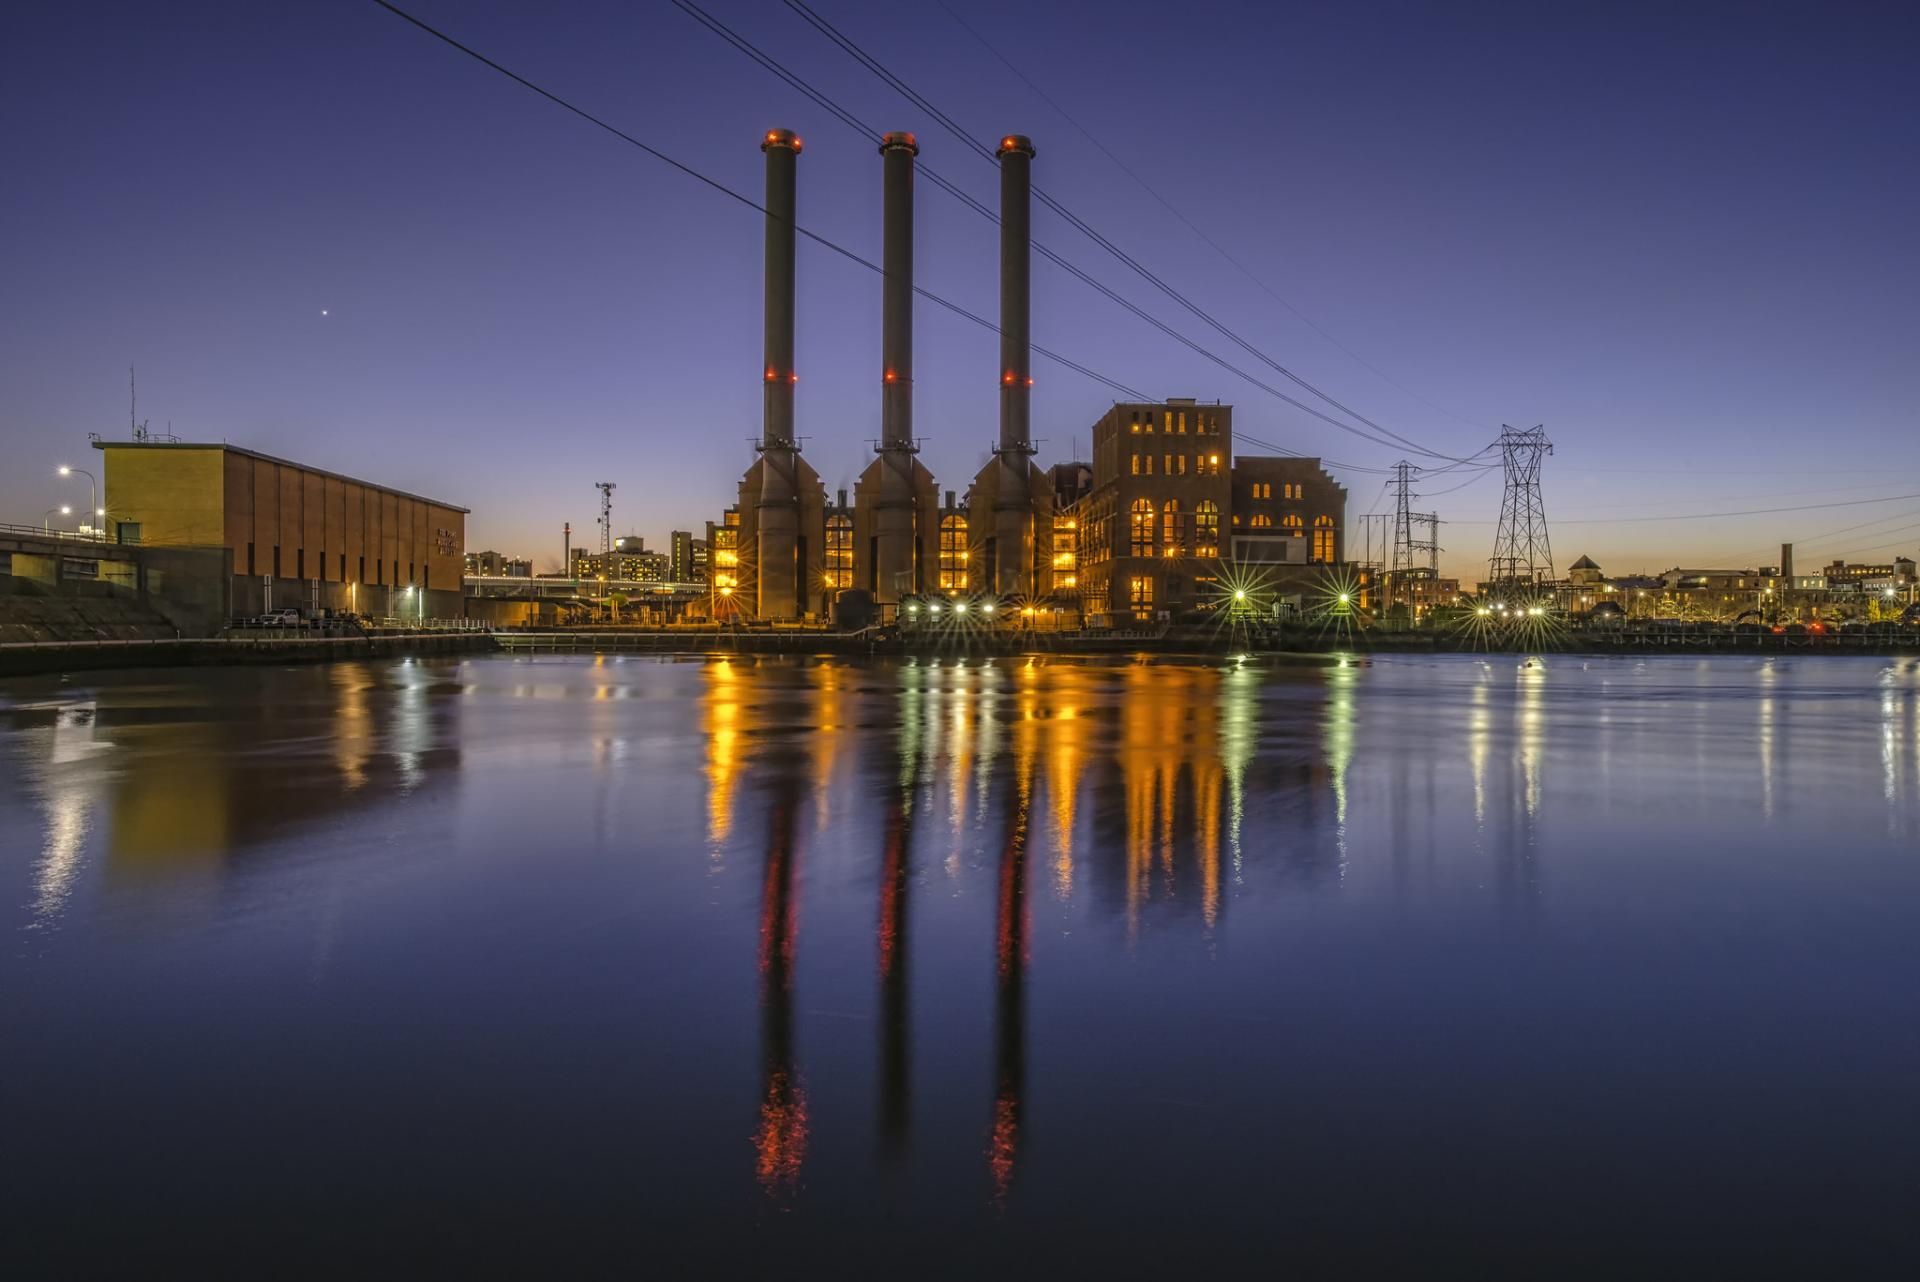 The three smokestacks of the Manchester Street power station at dusk